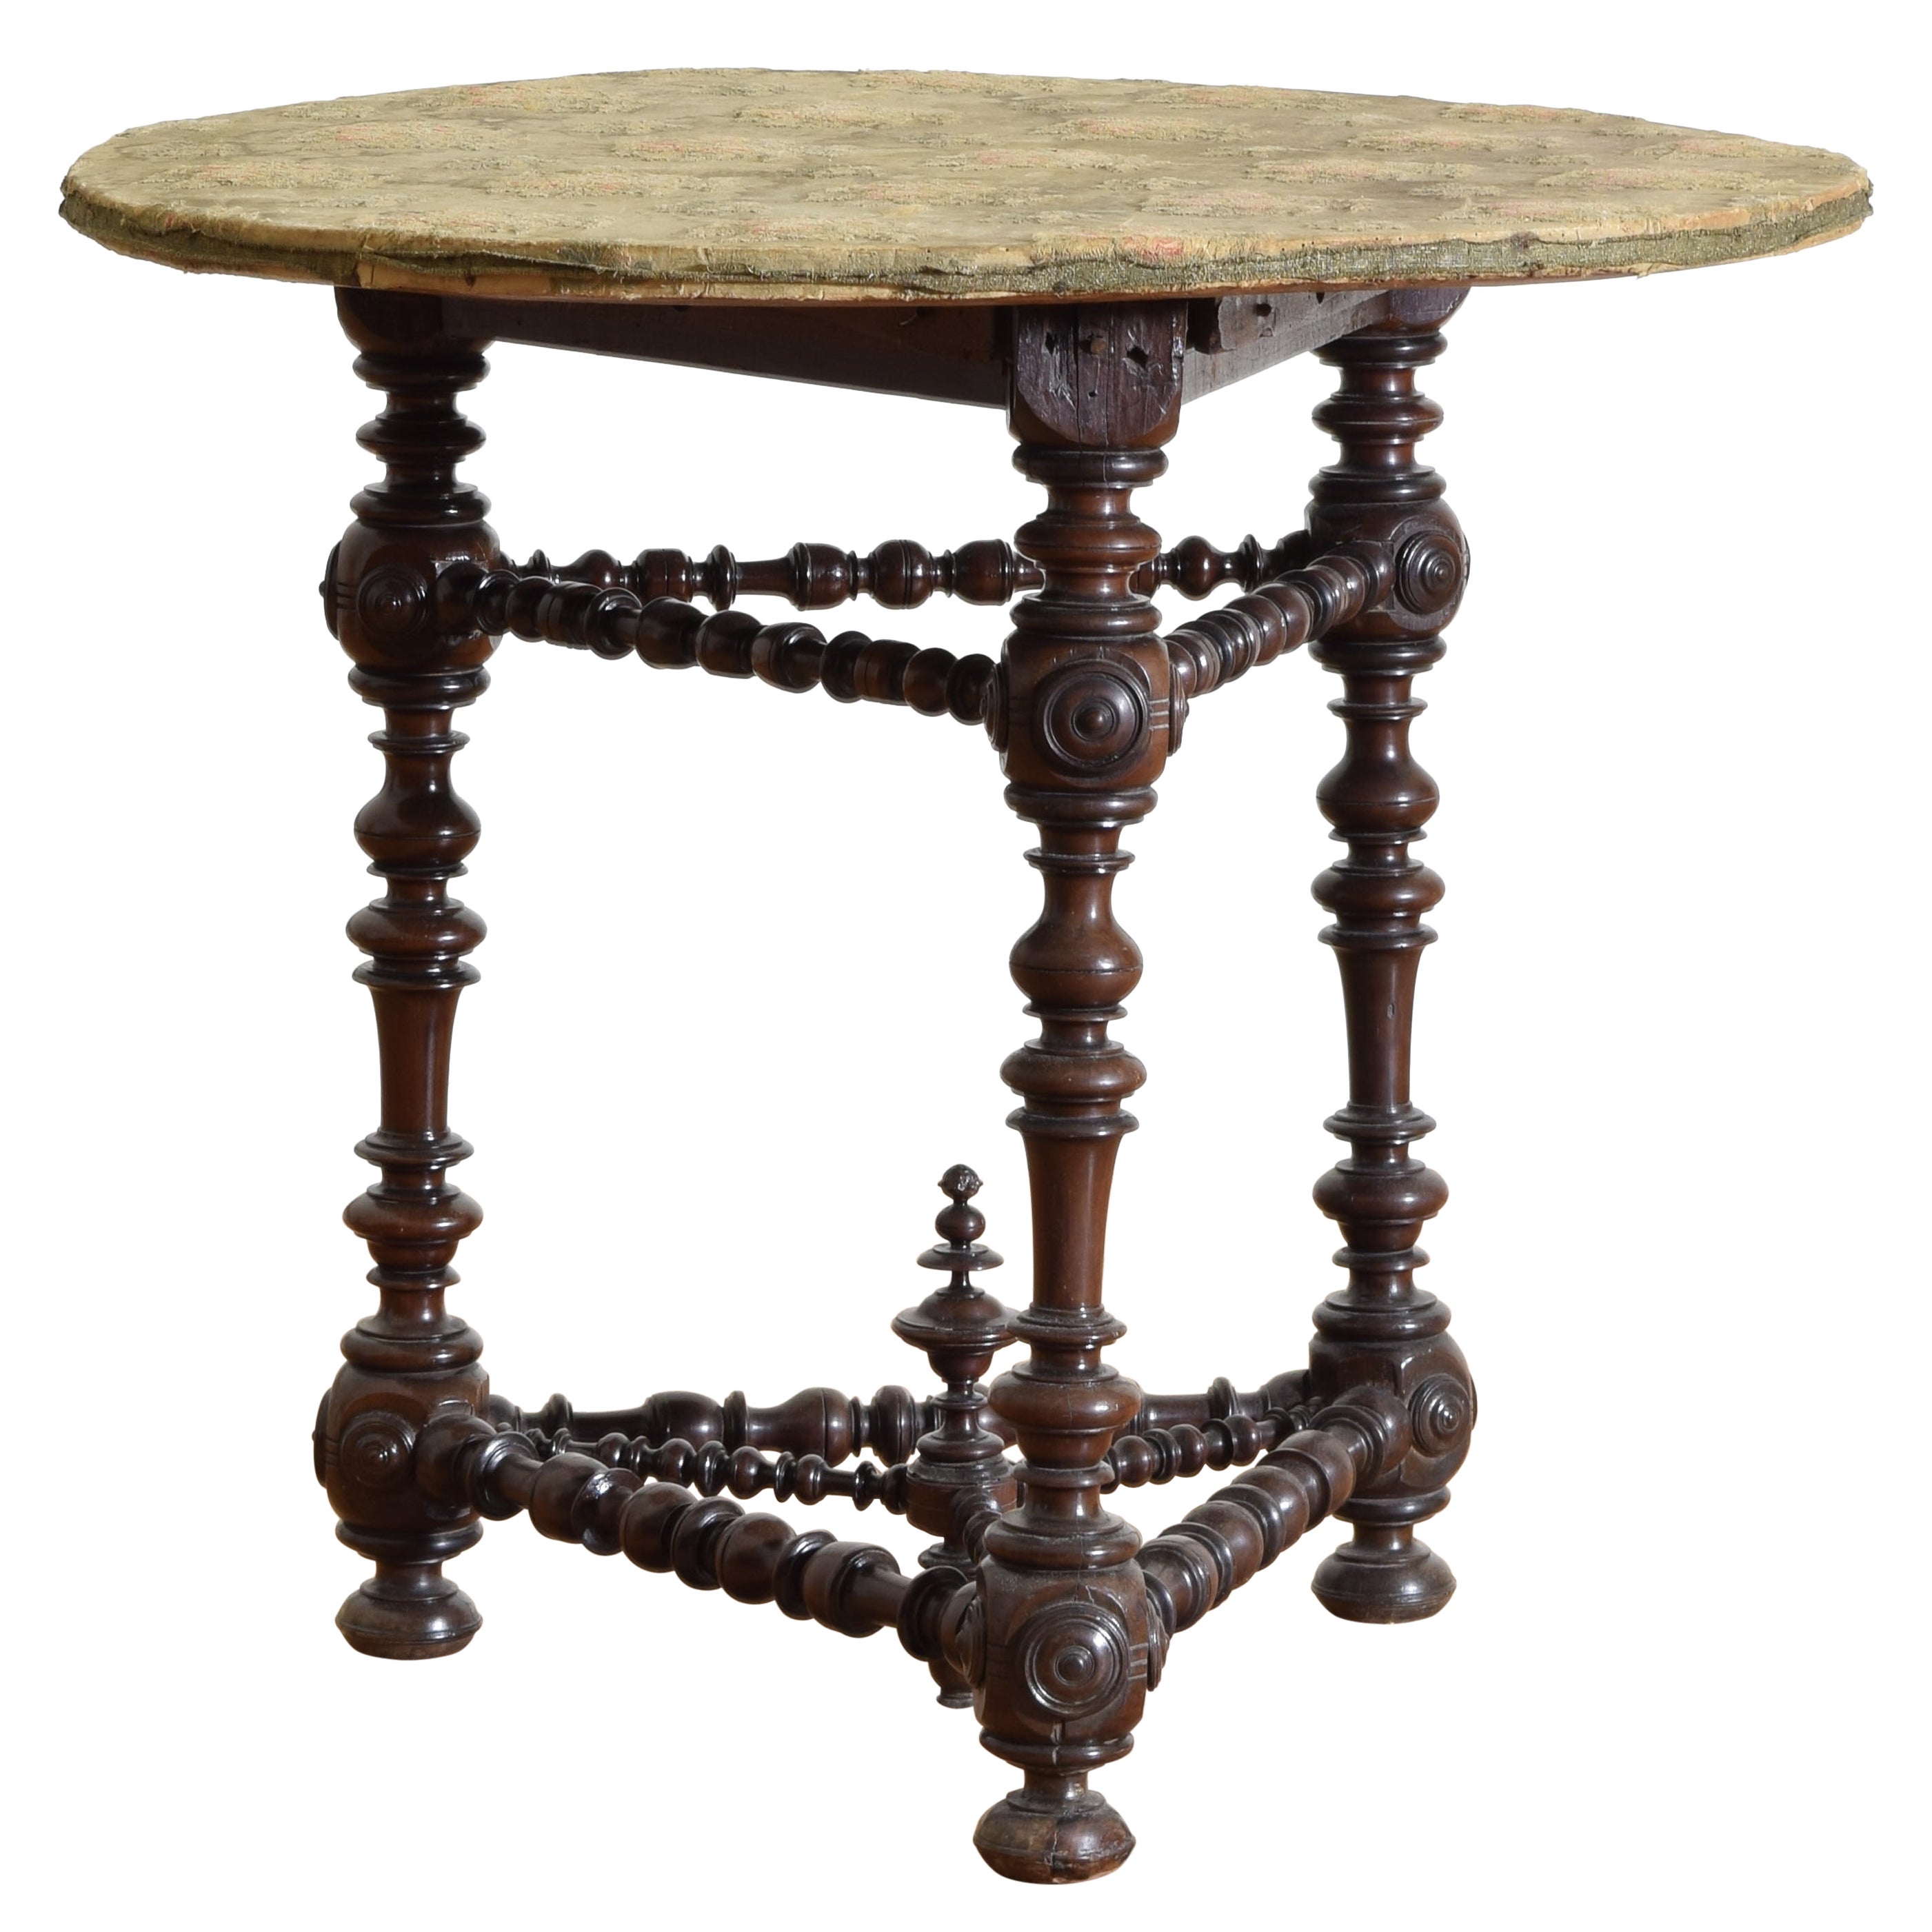 Early 1700s Center Tables